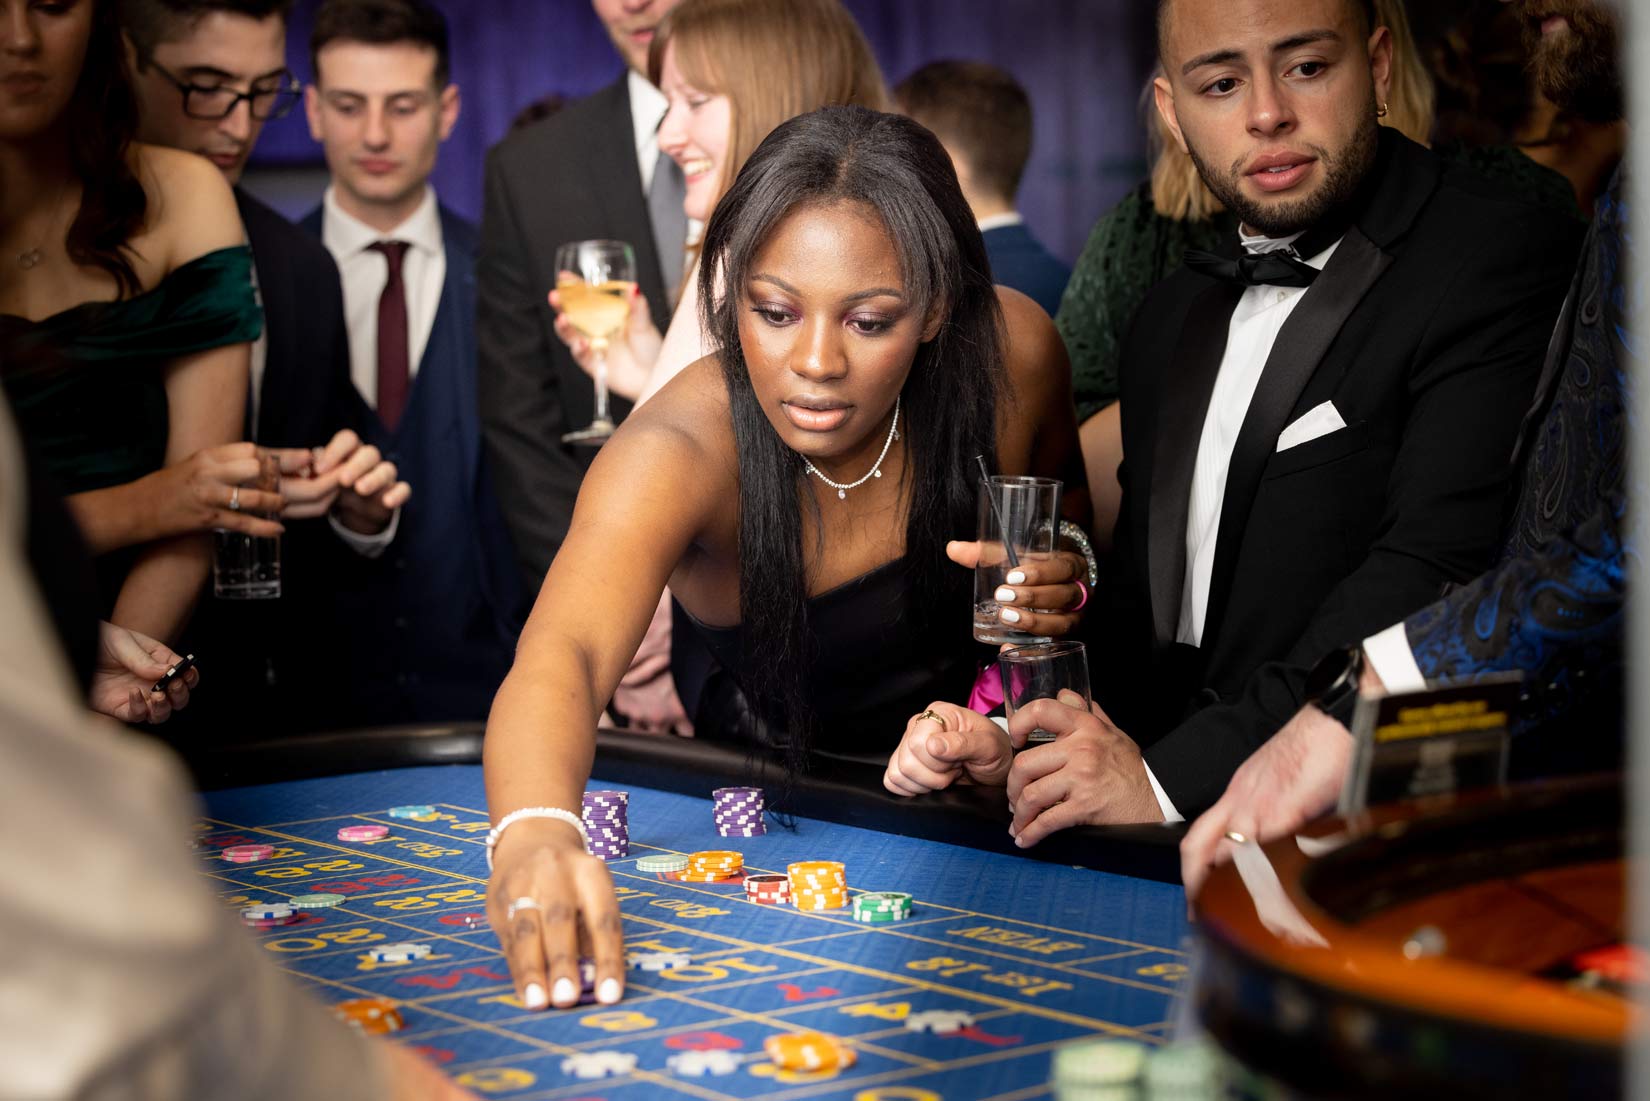 Young lady places a bet on a blue roulette table at at an awards ceremony. 